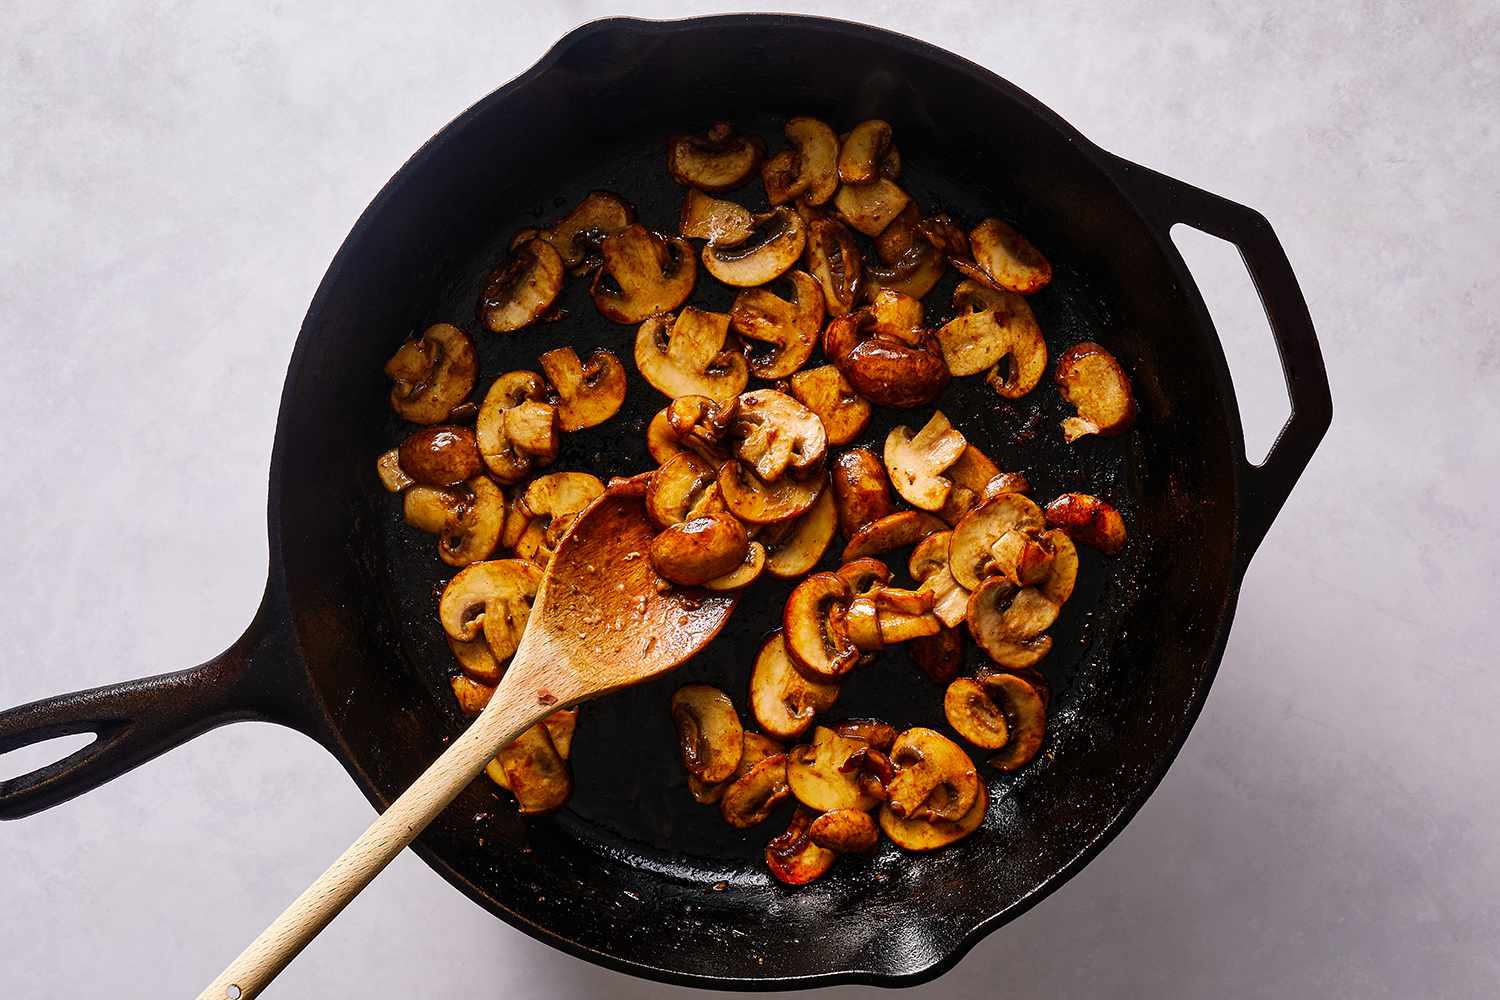 Mushrooms cooking in a cast iron skillet, with a wooden spoon 